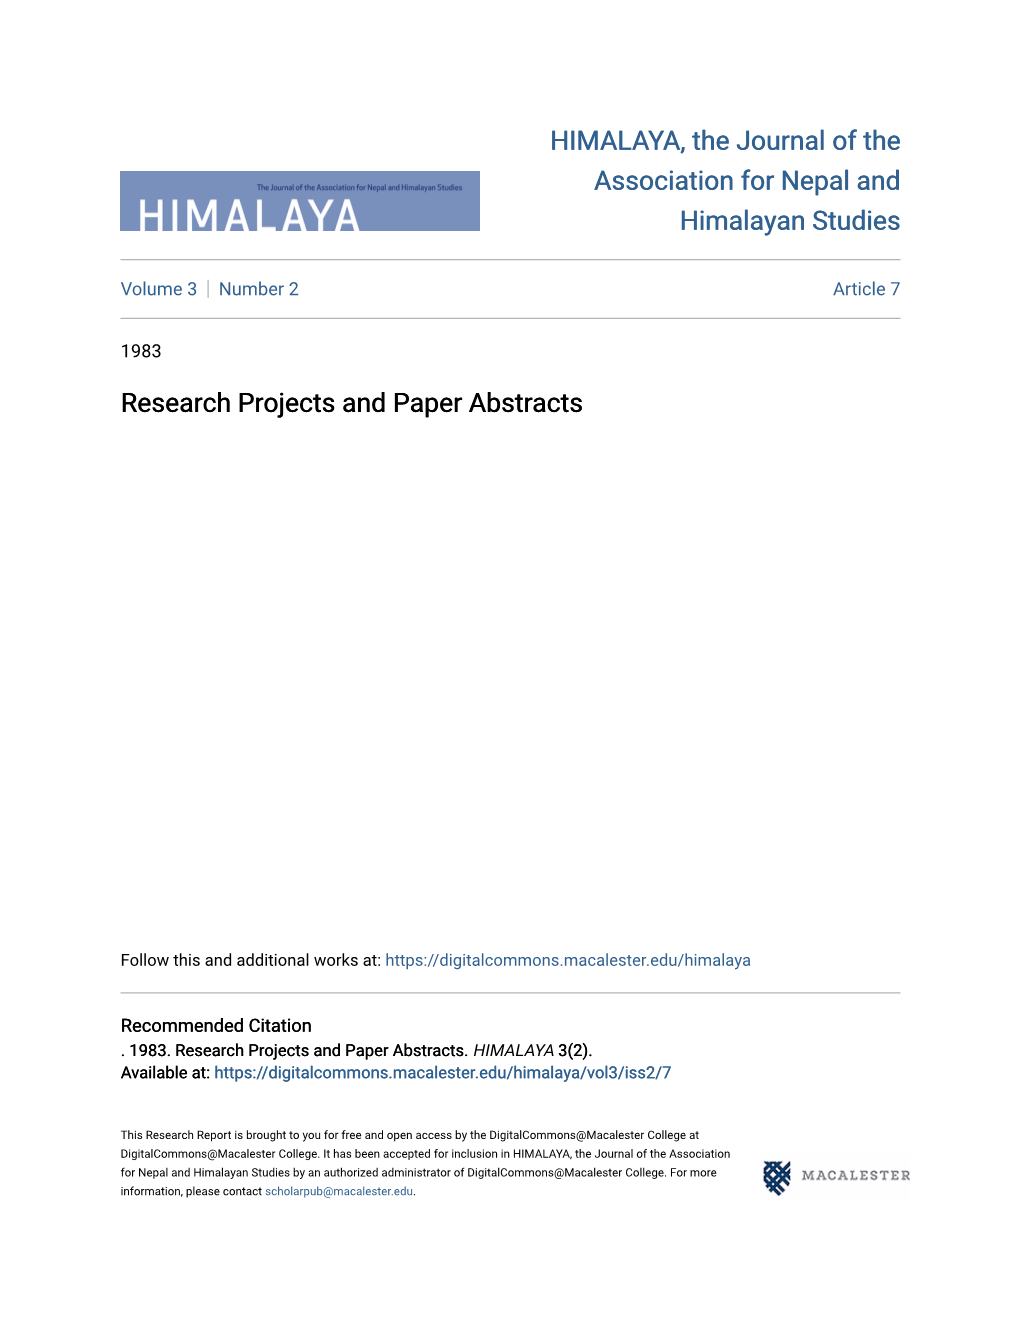 Research Projects and Paper Abstracts